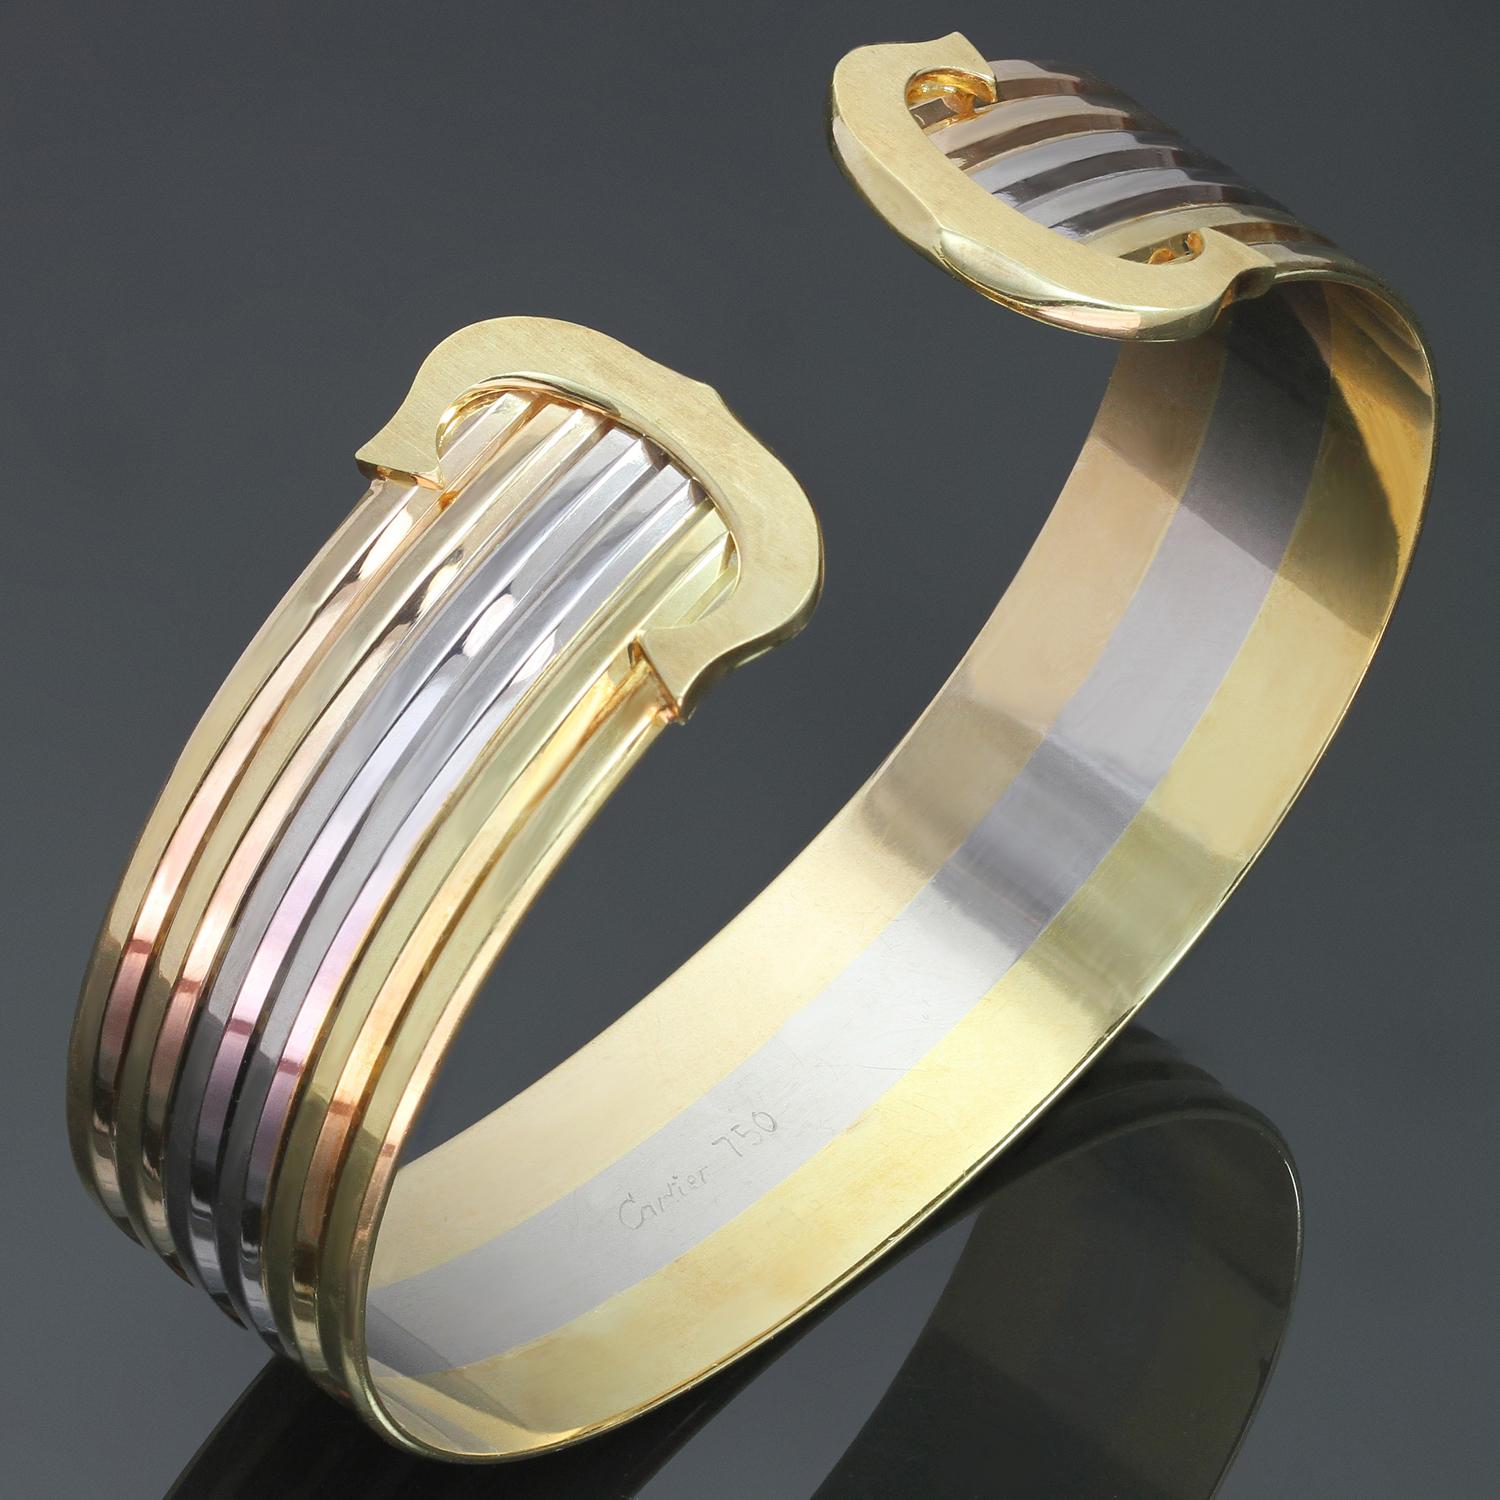 This classic Cartier bangle bracelet features a three-row design crafted in 18k yellow, white and rose gold and completed with the iconic Double C logos in yellow gold. The hallmarks are faint but visibel. Made in France circa 1997. Measurements: